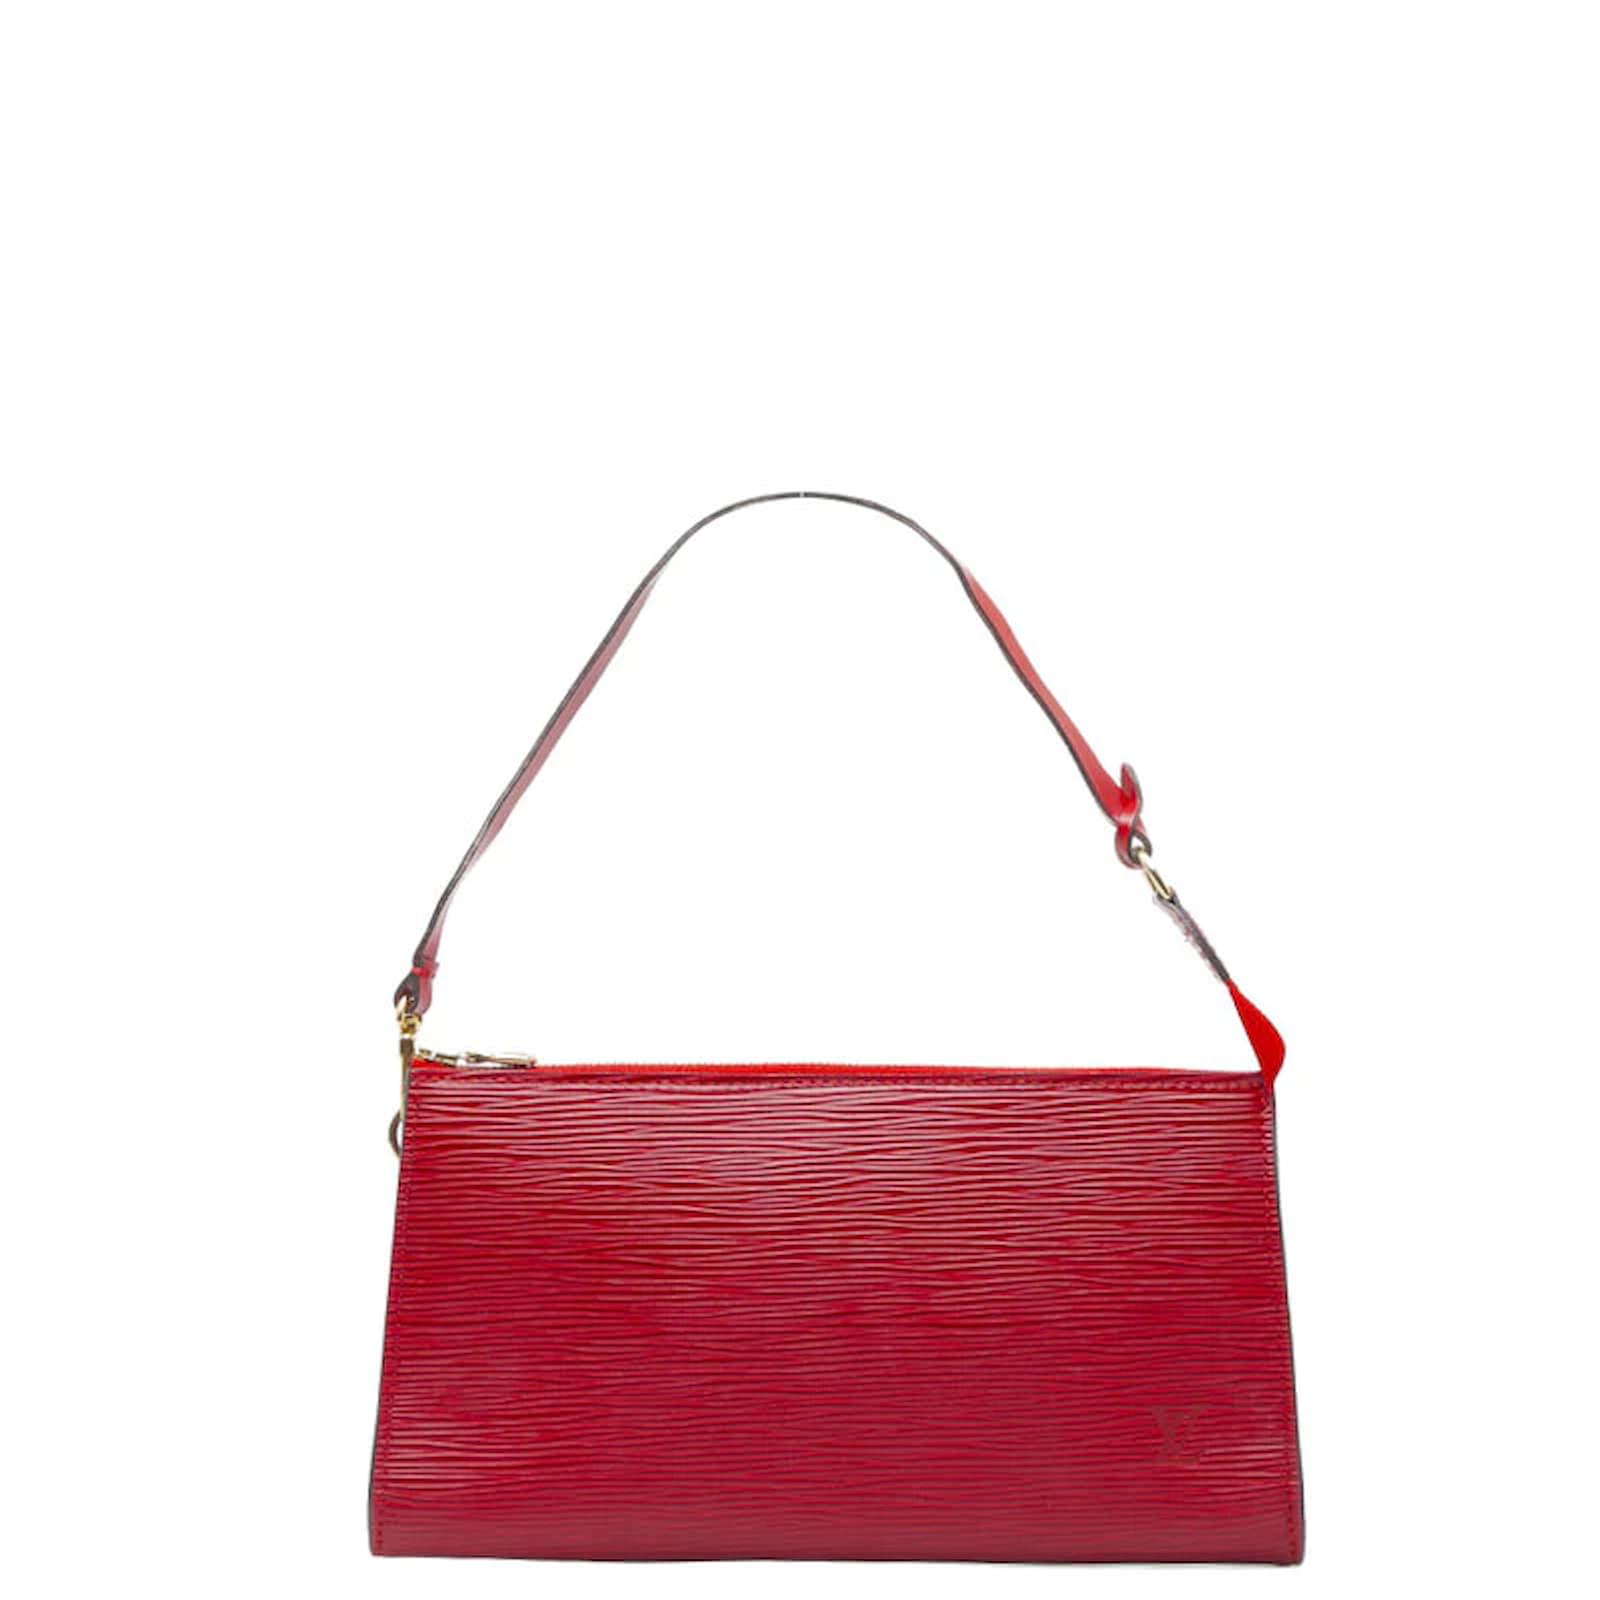 Louis Vuitton Epi Noe Tricolor M44084 Red Leather Pony-style